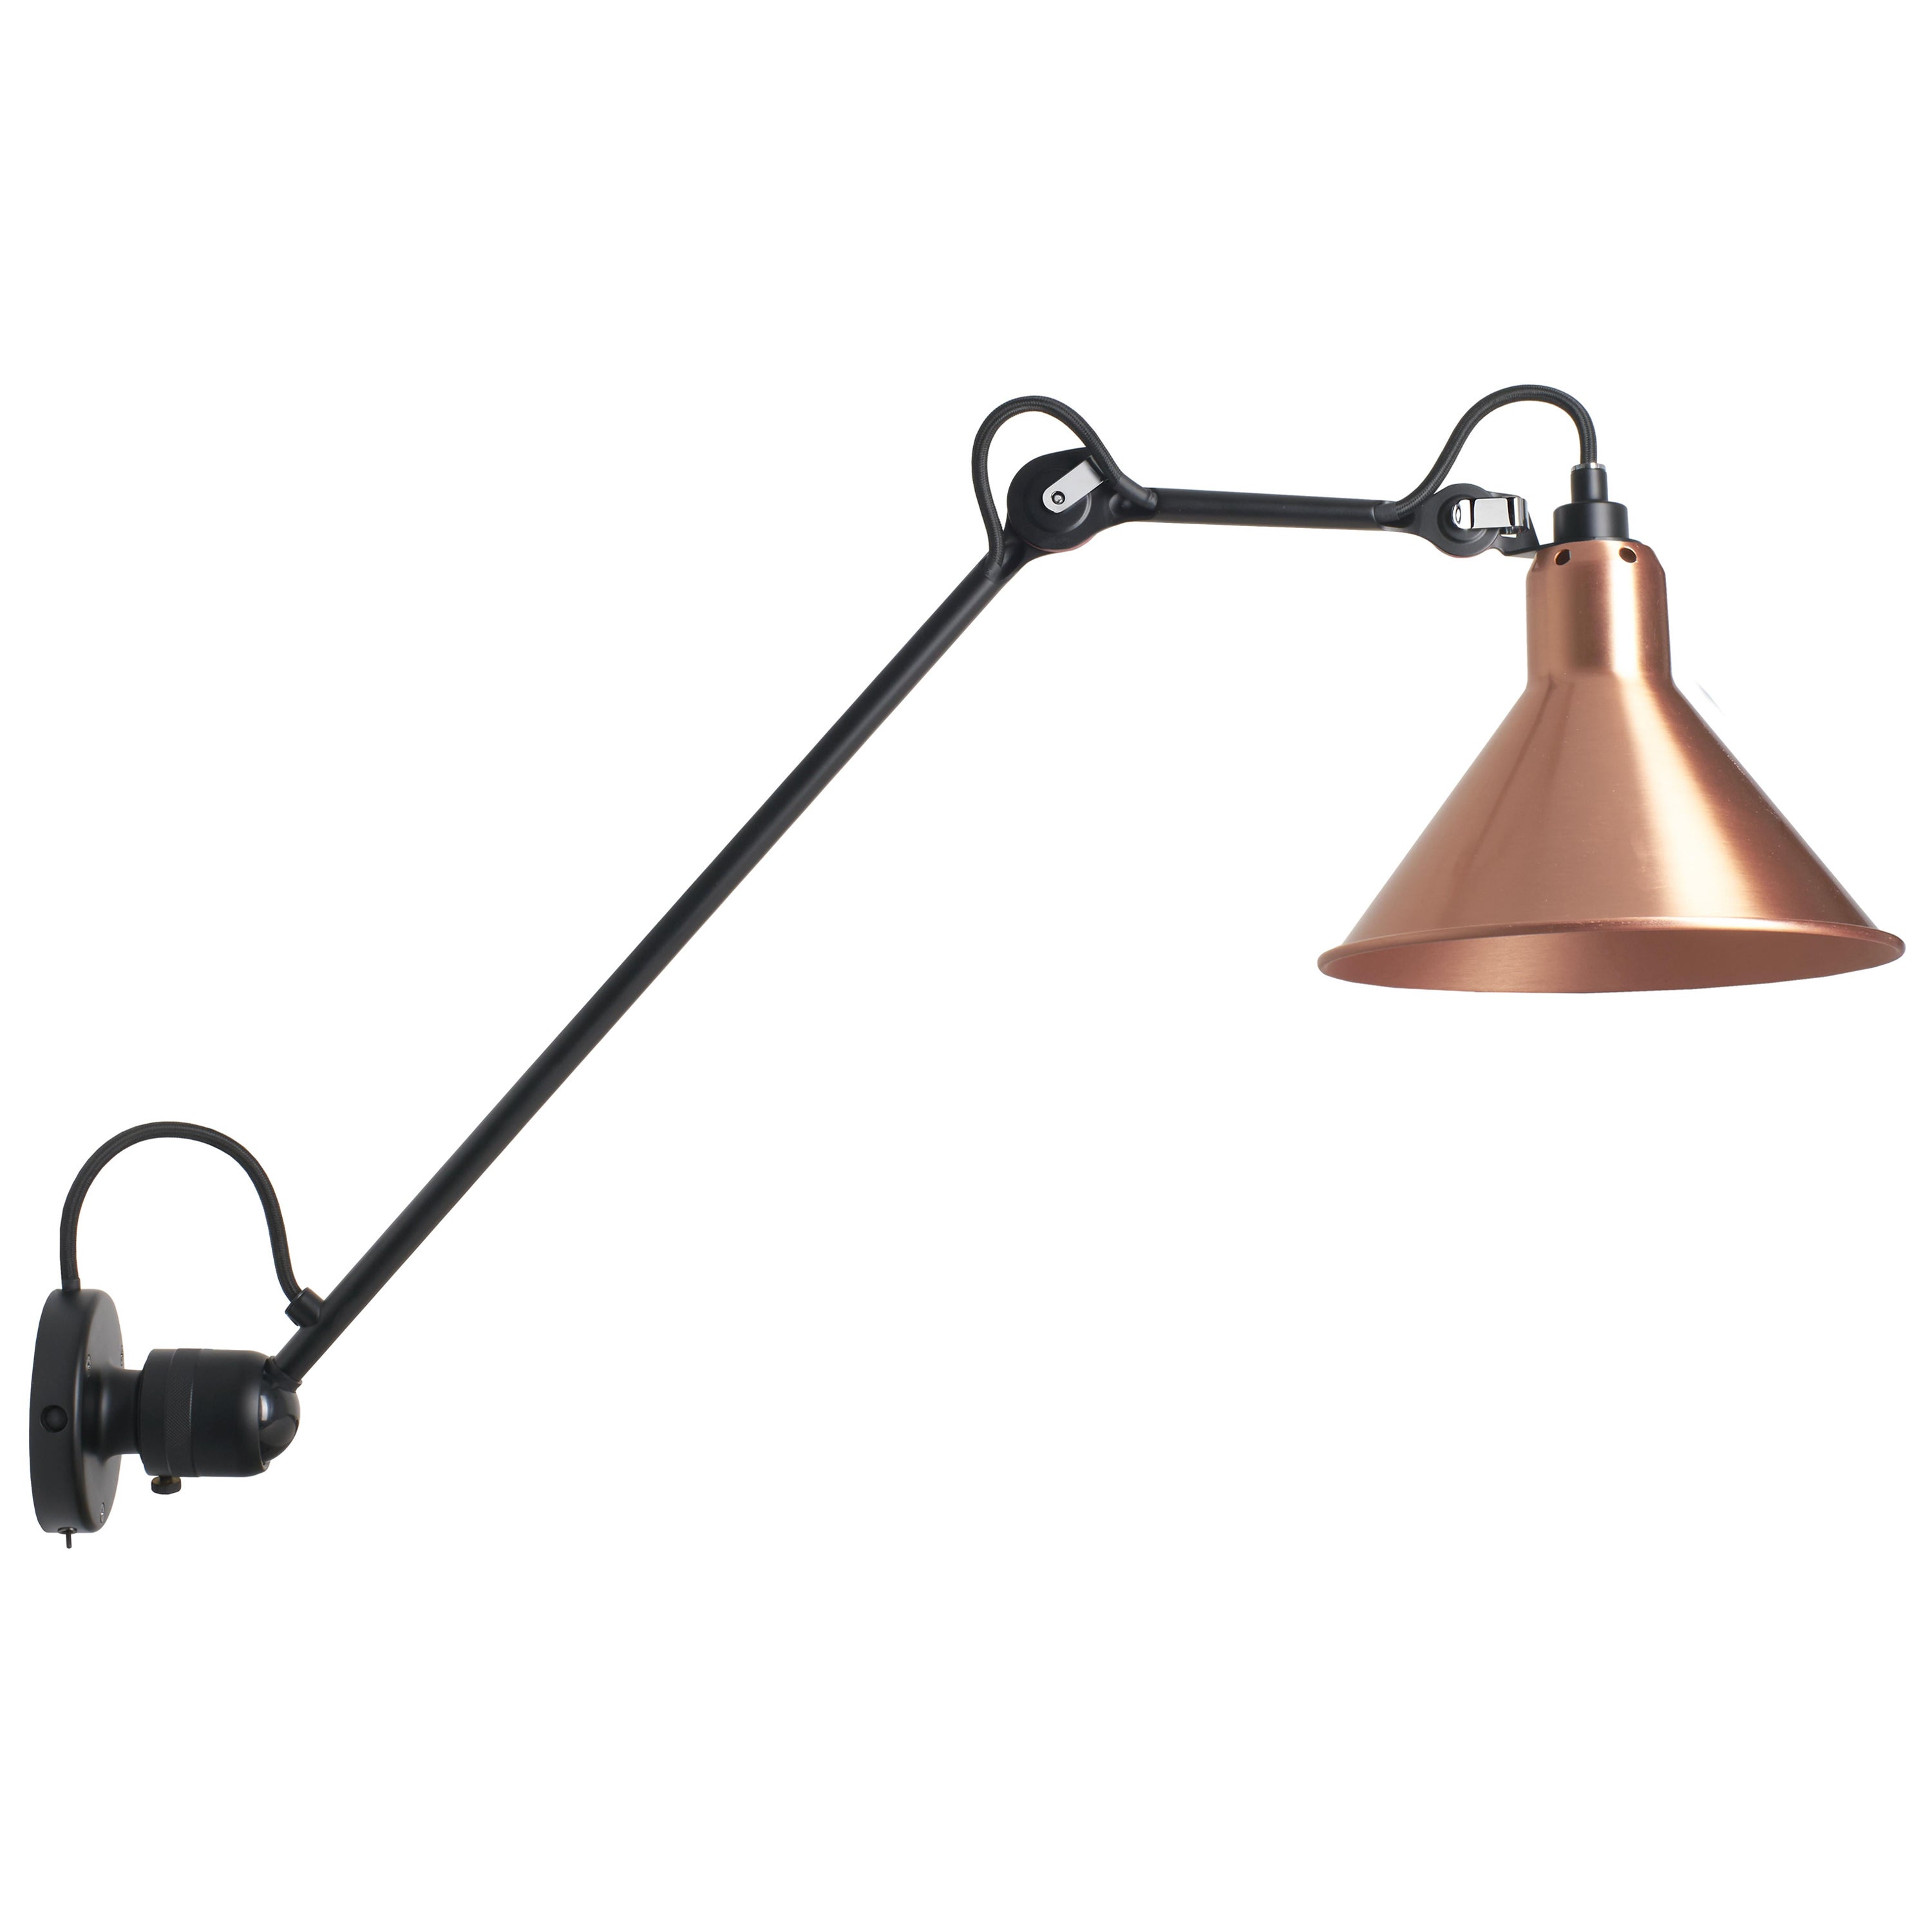 DCW Editions La Lampe Gras N°304 L40 SW Conic Wall Lamp in Copper Shade For Sale